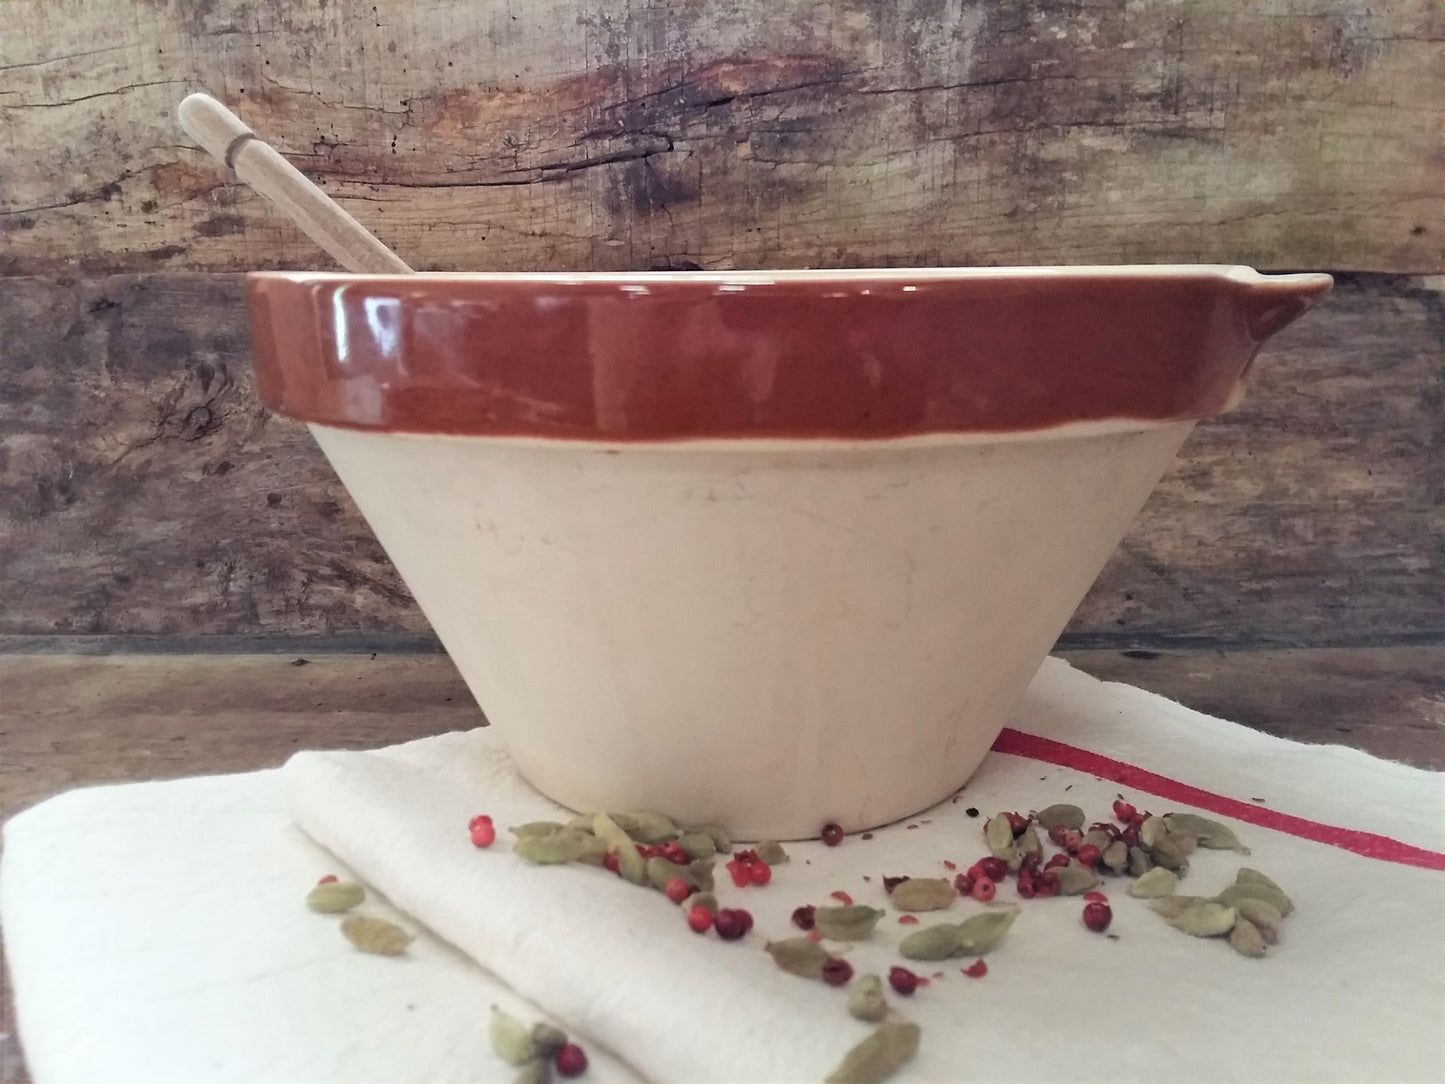 Huge, 10 Inch, Mixing Bowl. Two-Tone, Part Glazed, French Confit Basin. from Tiggy and Pip - €110.00! Shop now at Tiggy and Pip